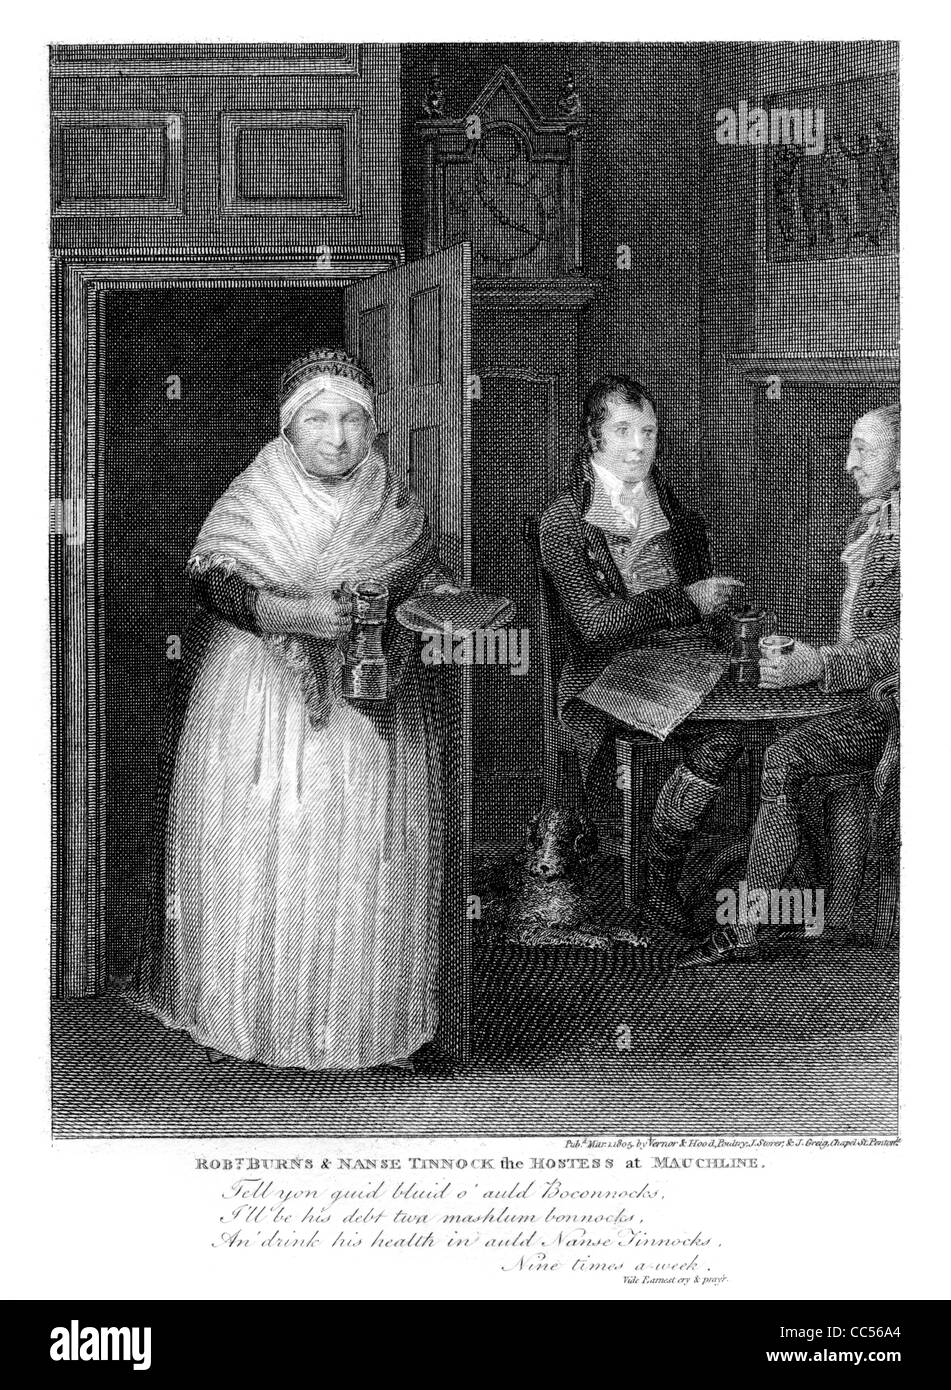 Robt. Burns & Nanse Tinnock the Hostess at Mauchline, an engraving from a book about Robert Burns published in 1805. Stock Photo